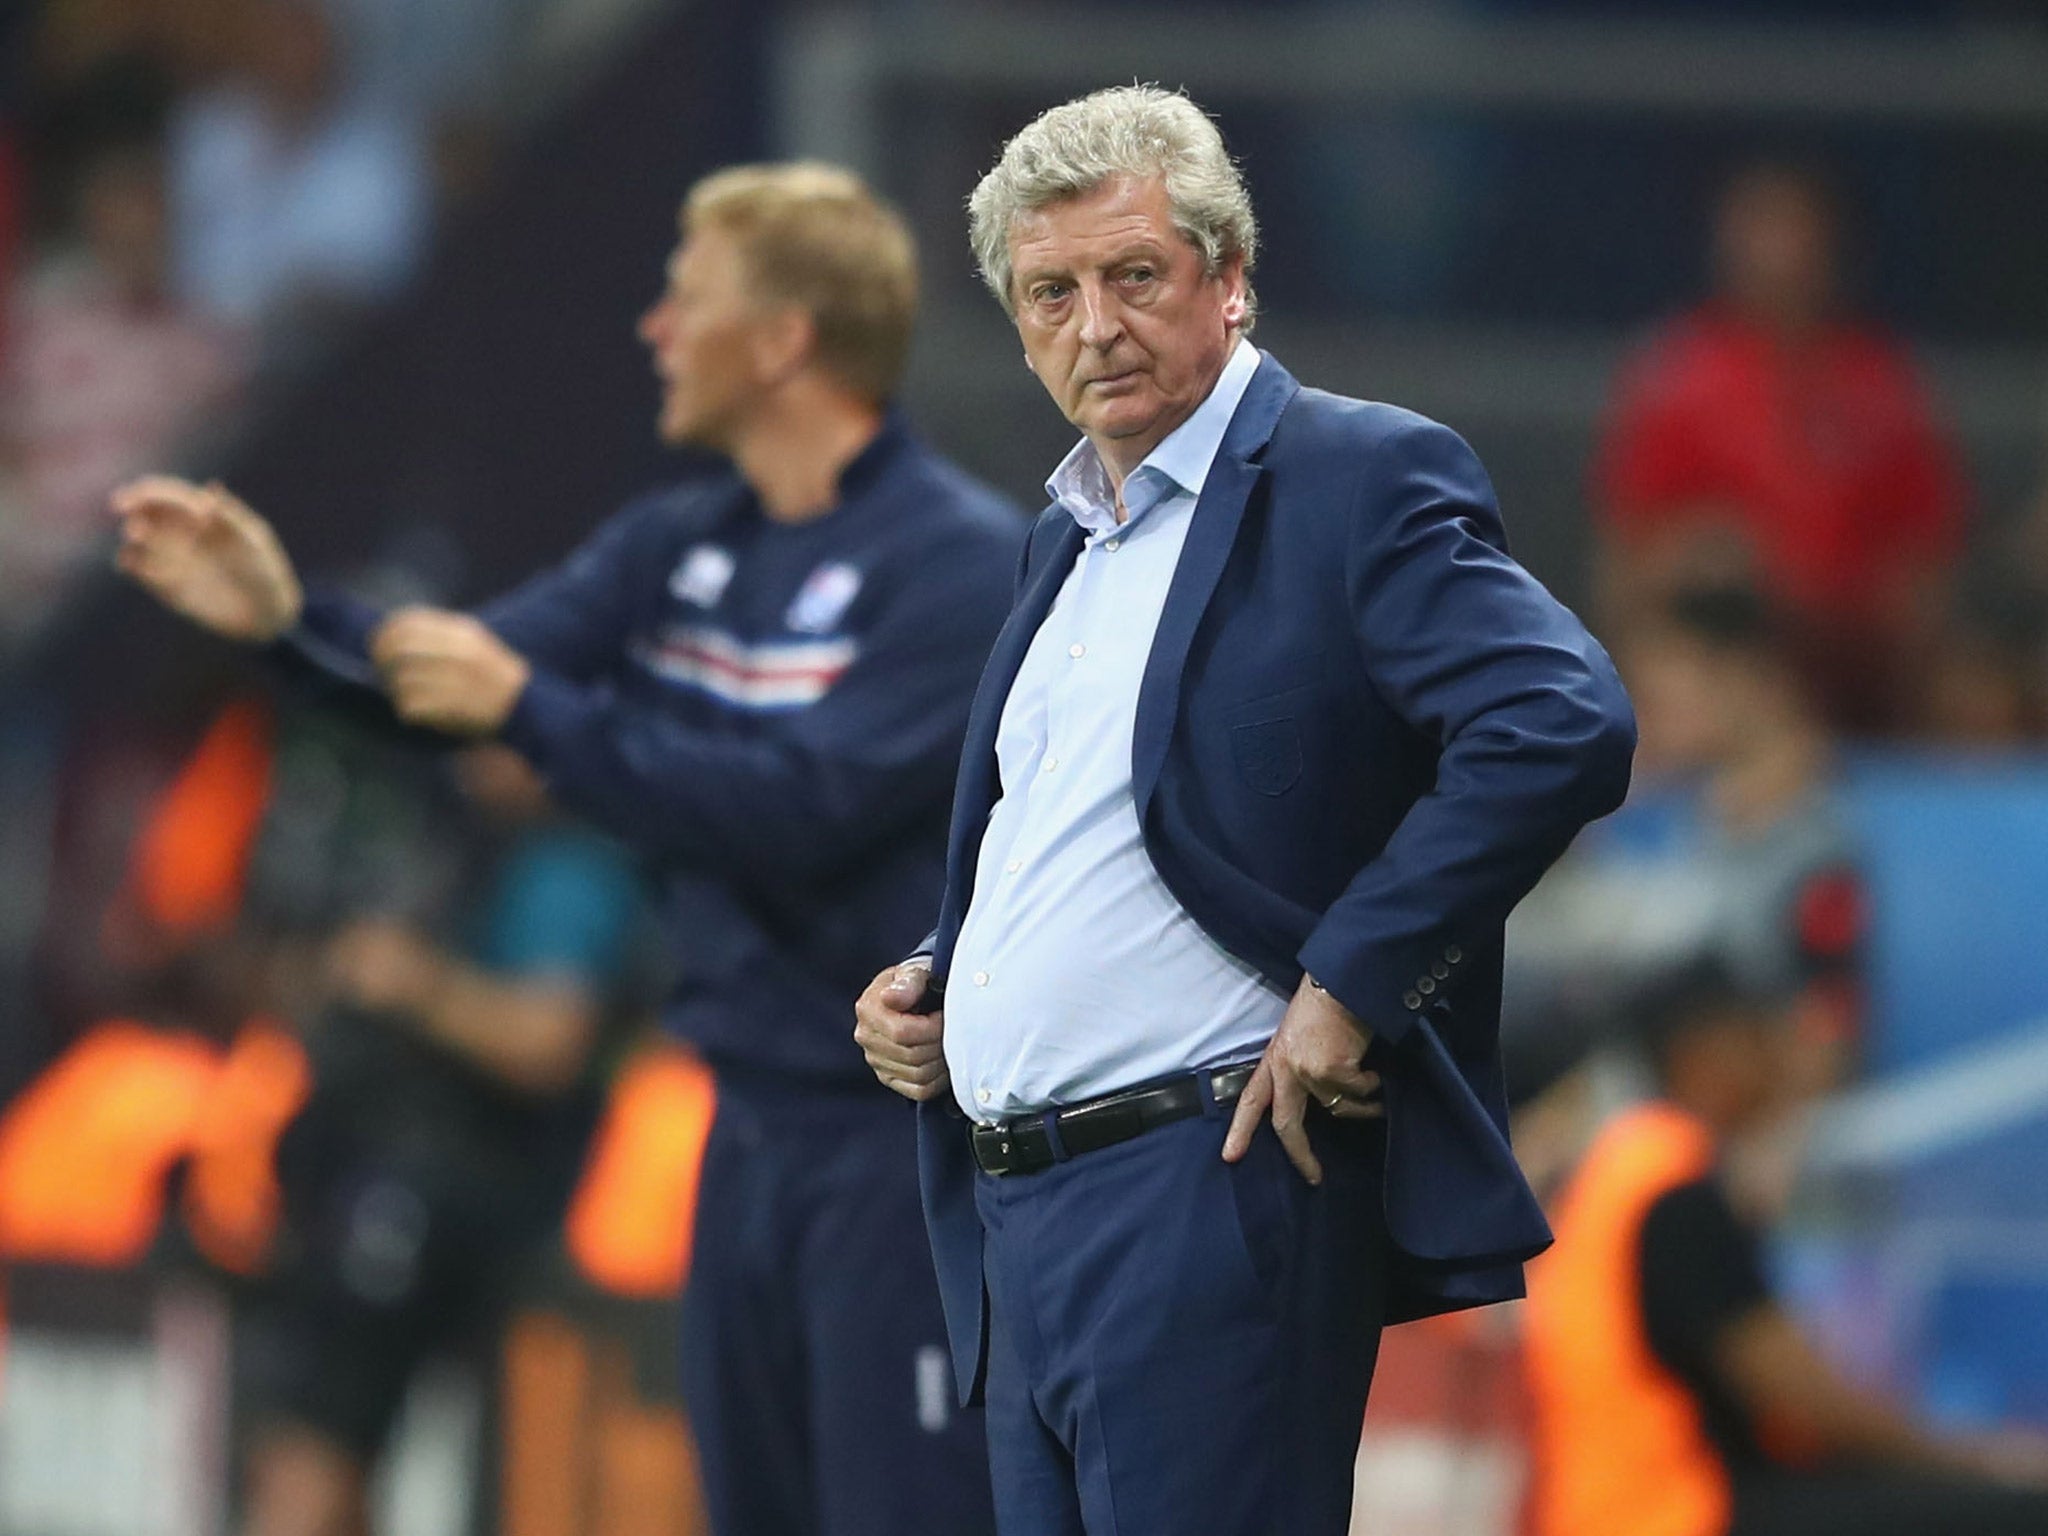 Roy Hodgson will face the media on Tuesday afternoon after resigning as England manager